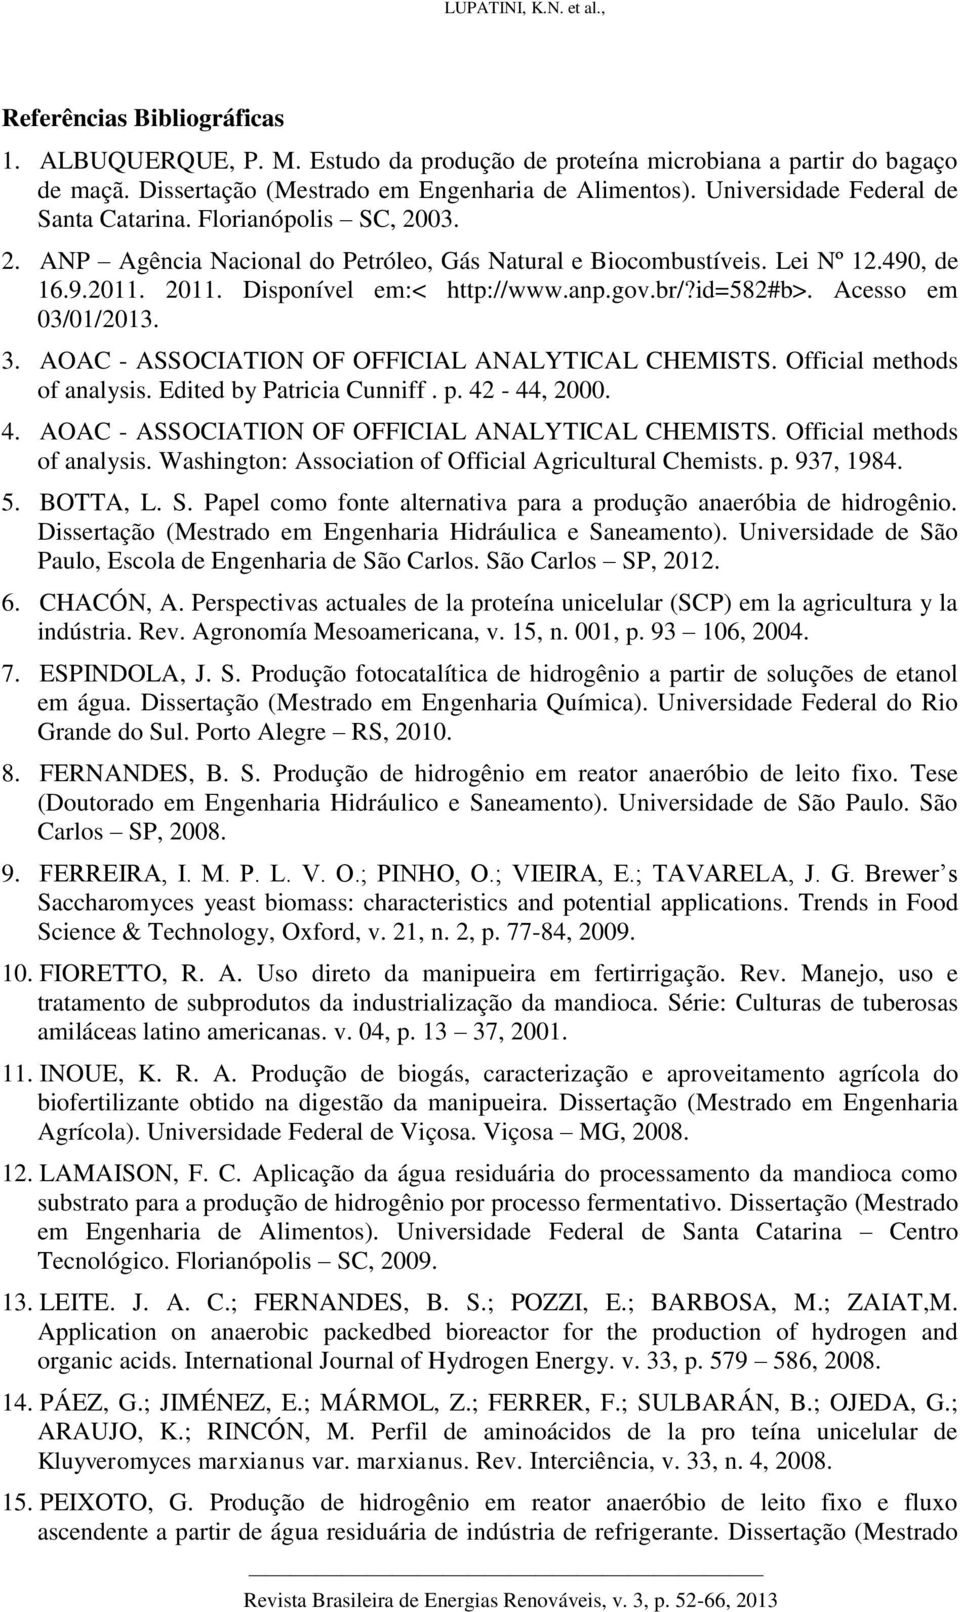 gov.br/?id=582#b>. Acesso em 03/01/2013. 3. AOAC - ASSOCIATION OF OFFICIAL ANALYTICAL CHEMISTS. Official methods of analysis. Edited by Patricia Cunniff. p. 42